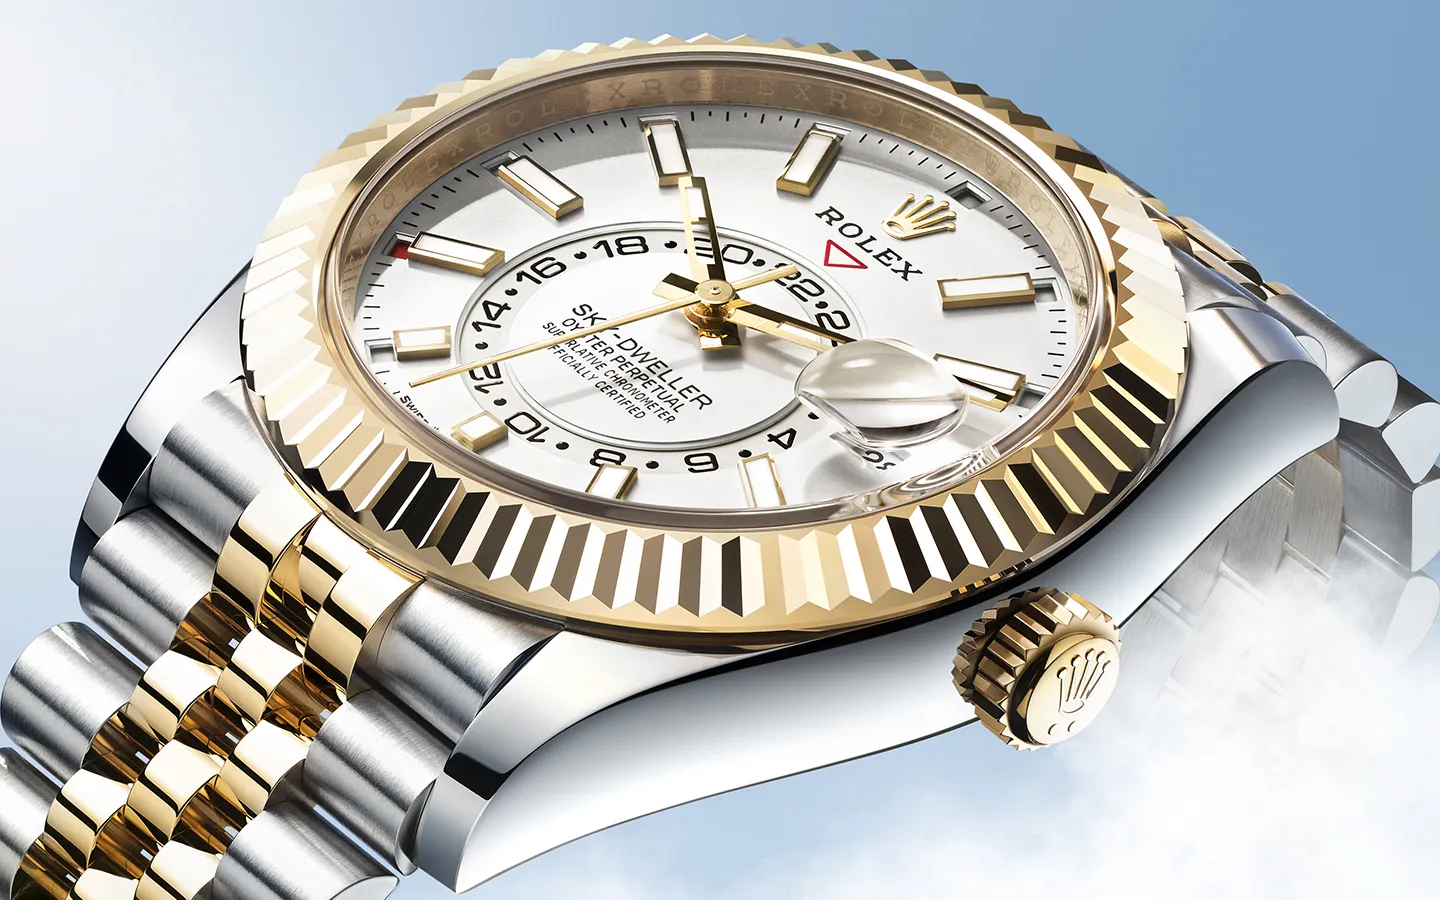 The oyster Perpetual Day-Date at Raffi Jewellers